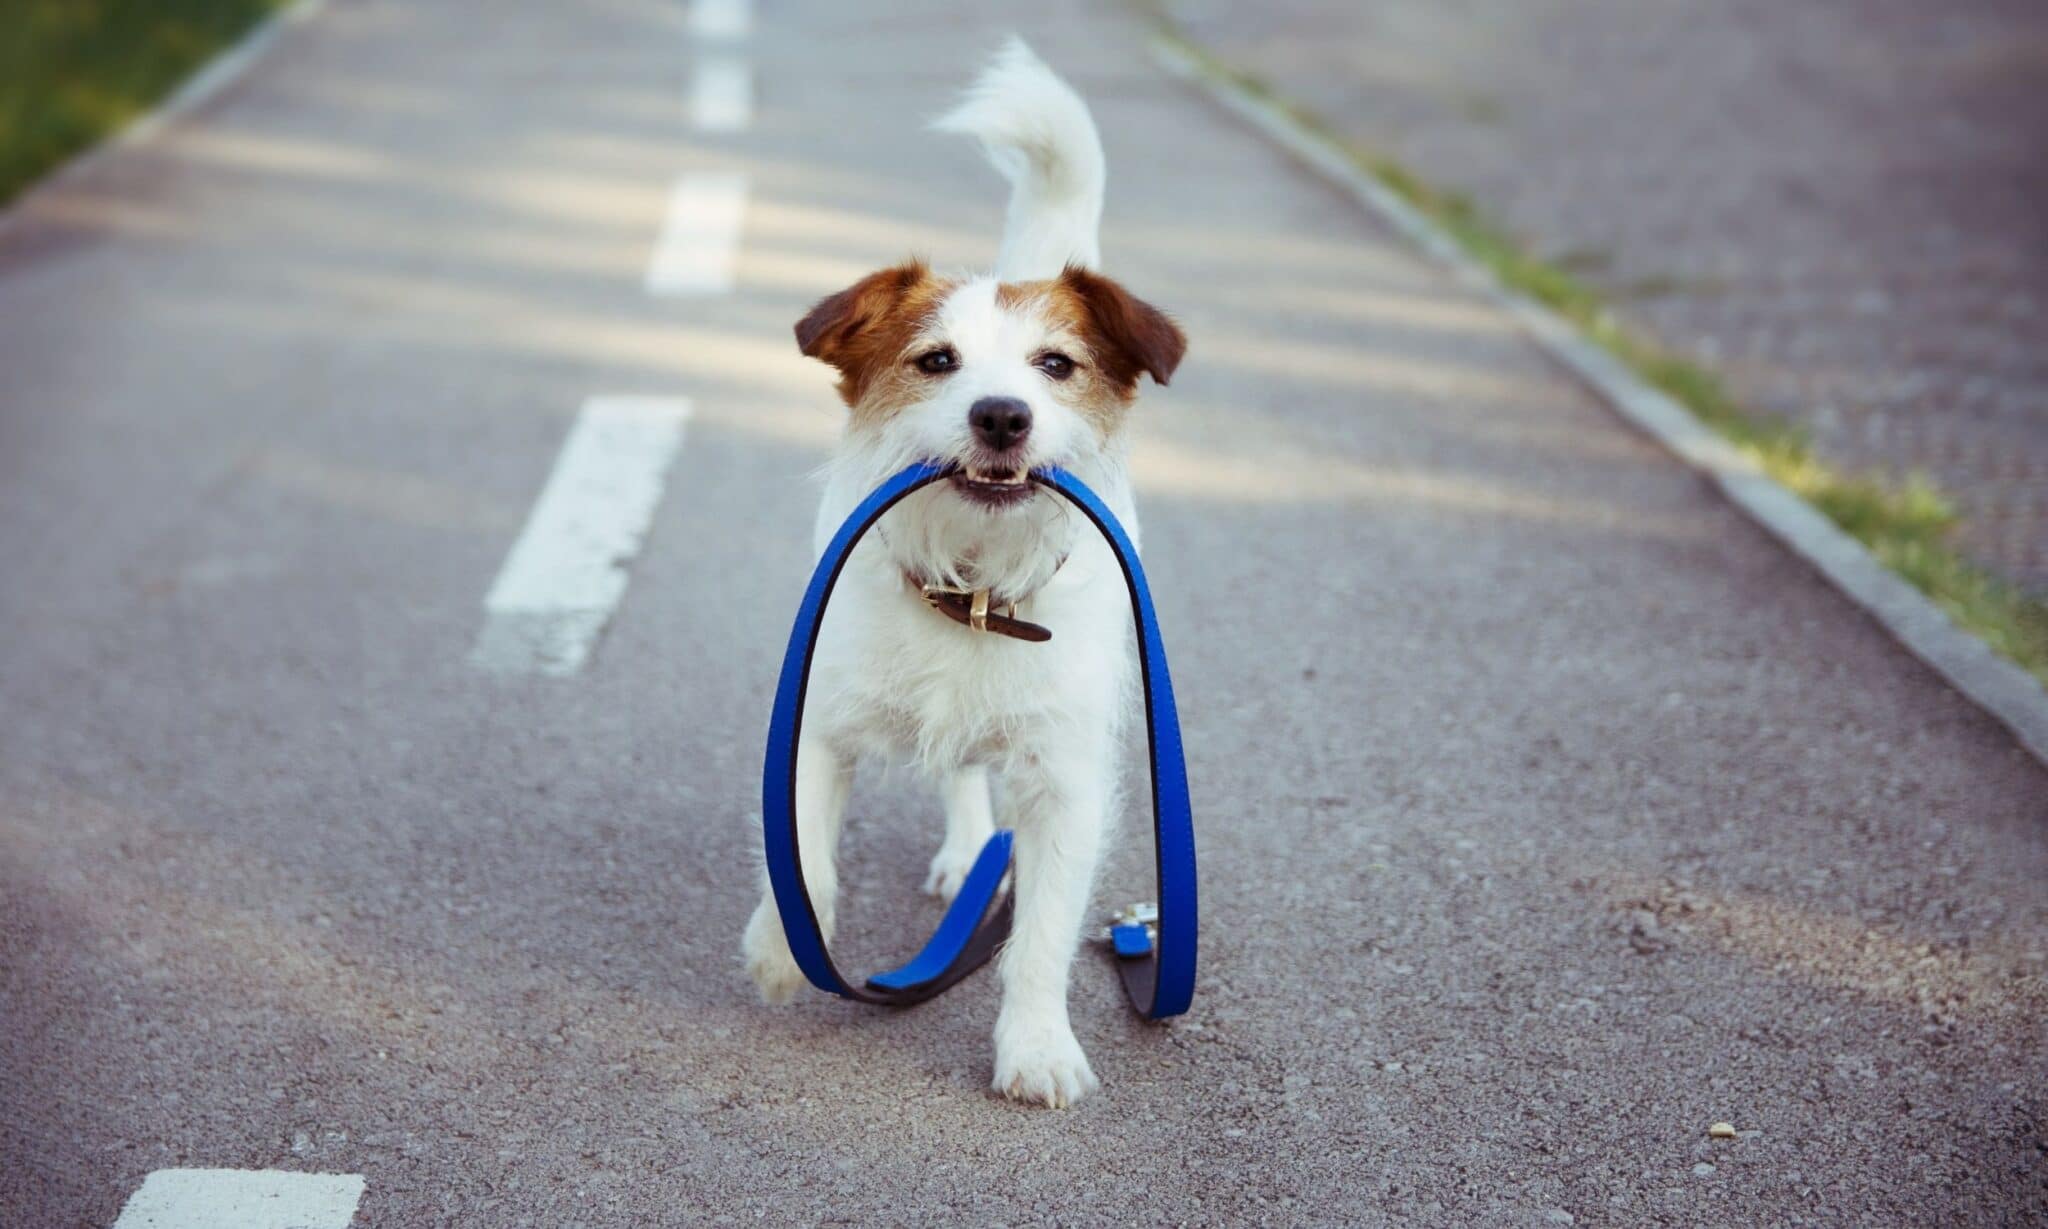 How To Train Your Dog Off-Leash